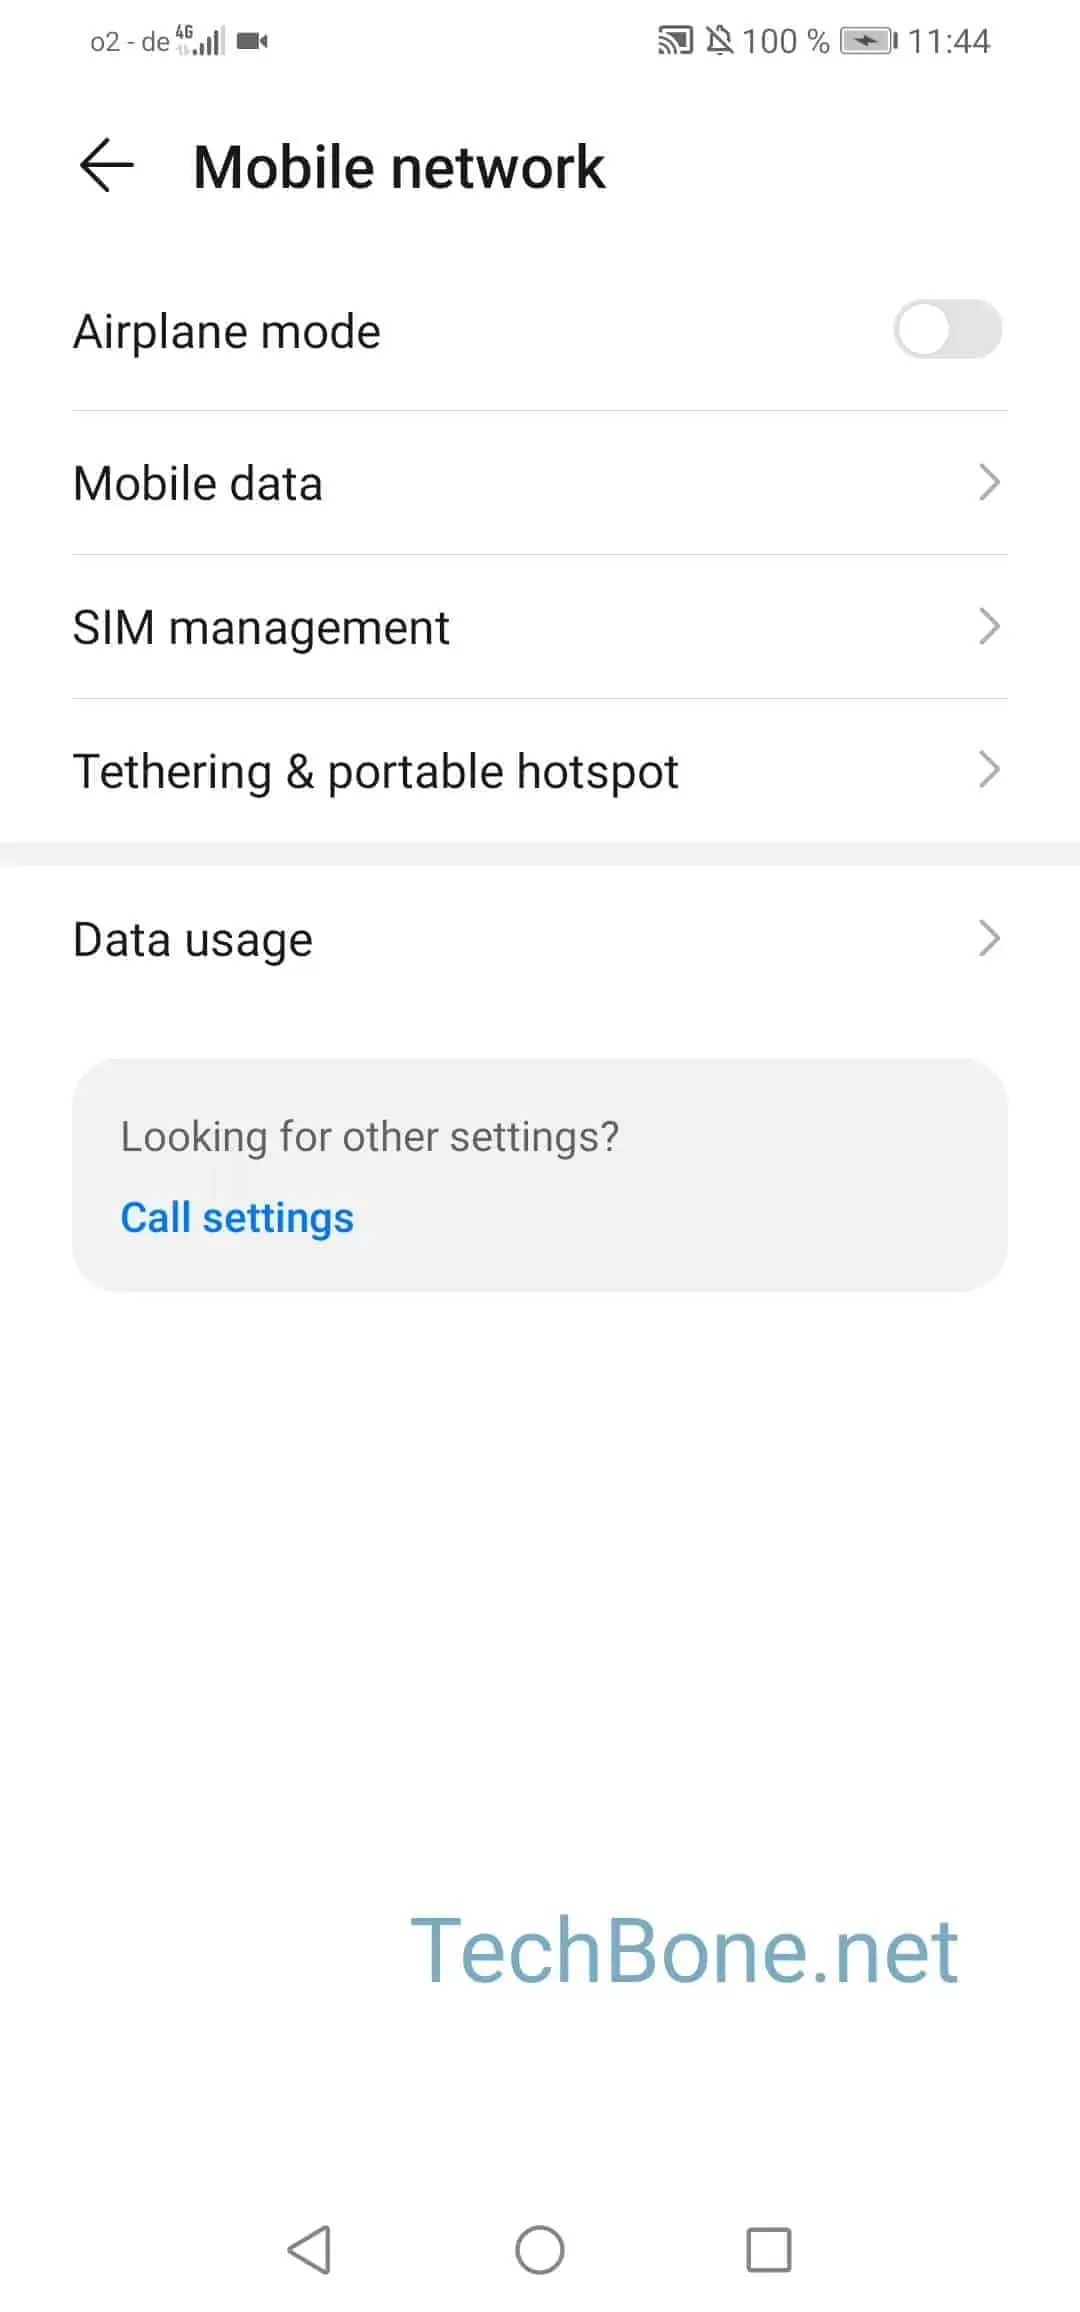 How to enable disable USB tethering - Huawei | TechBone